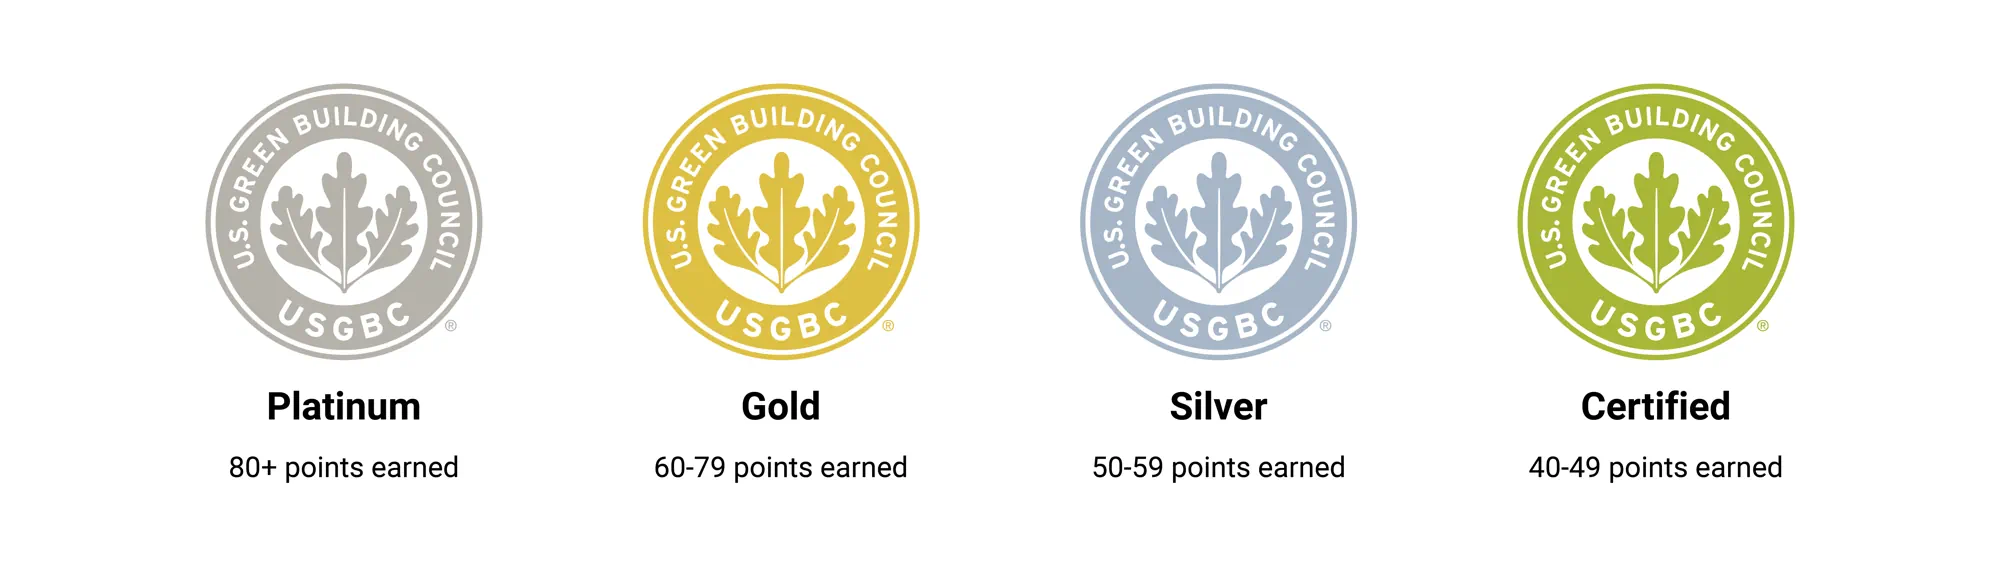 LEED Certification Badges: Platinum, Gold, Silver and Certified.